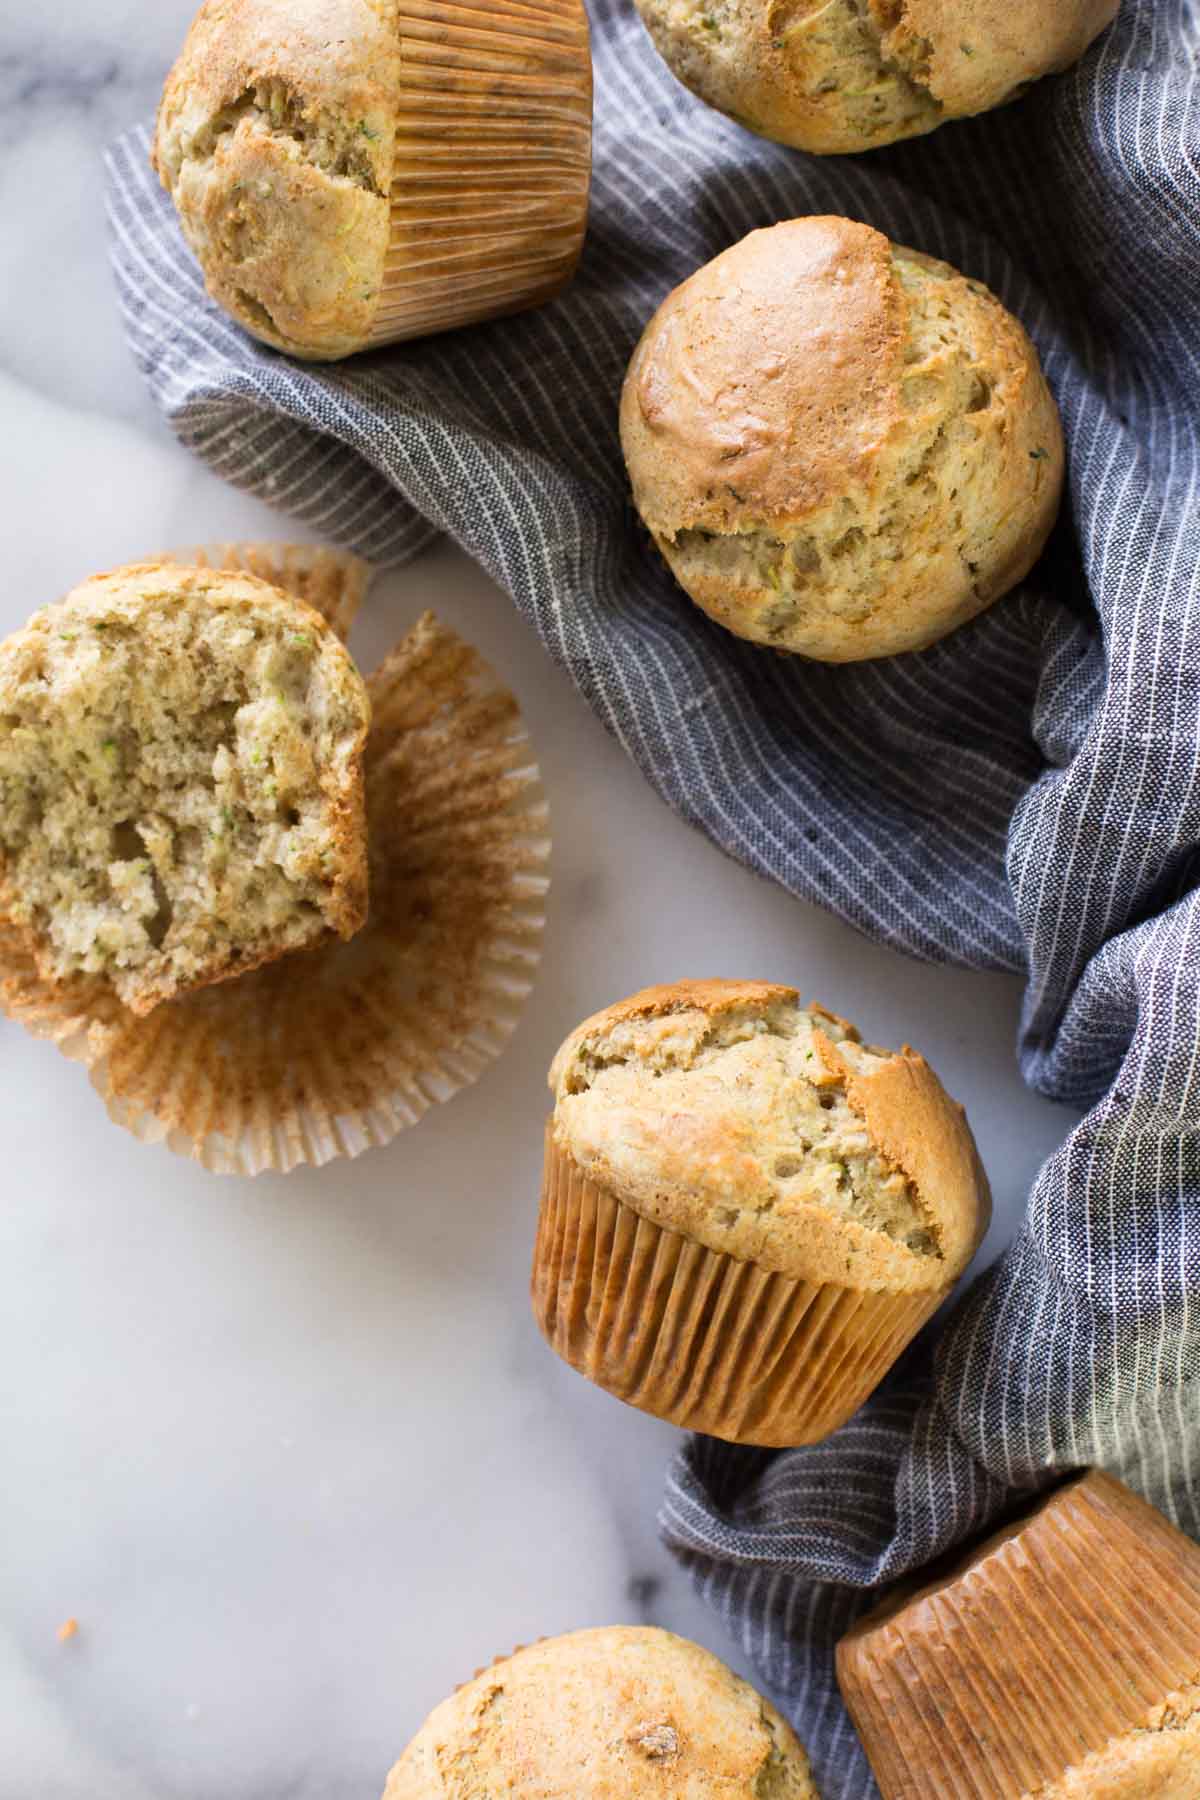 A half of a Healthier Zucchini Muffin sitting on its wrapper, with more whole muffins around it.  